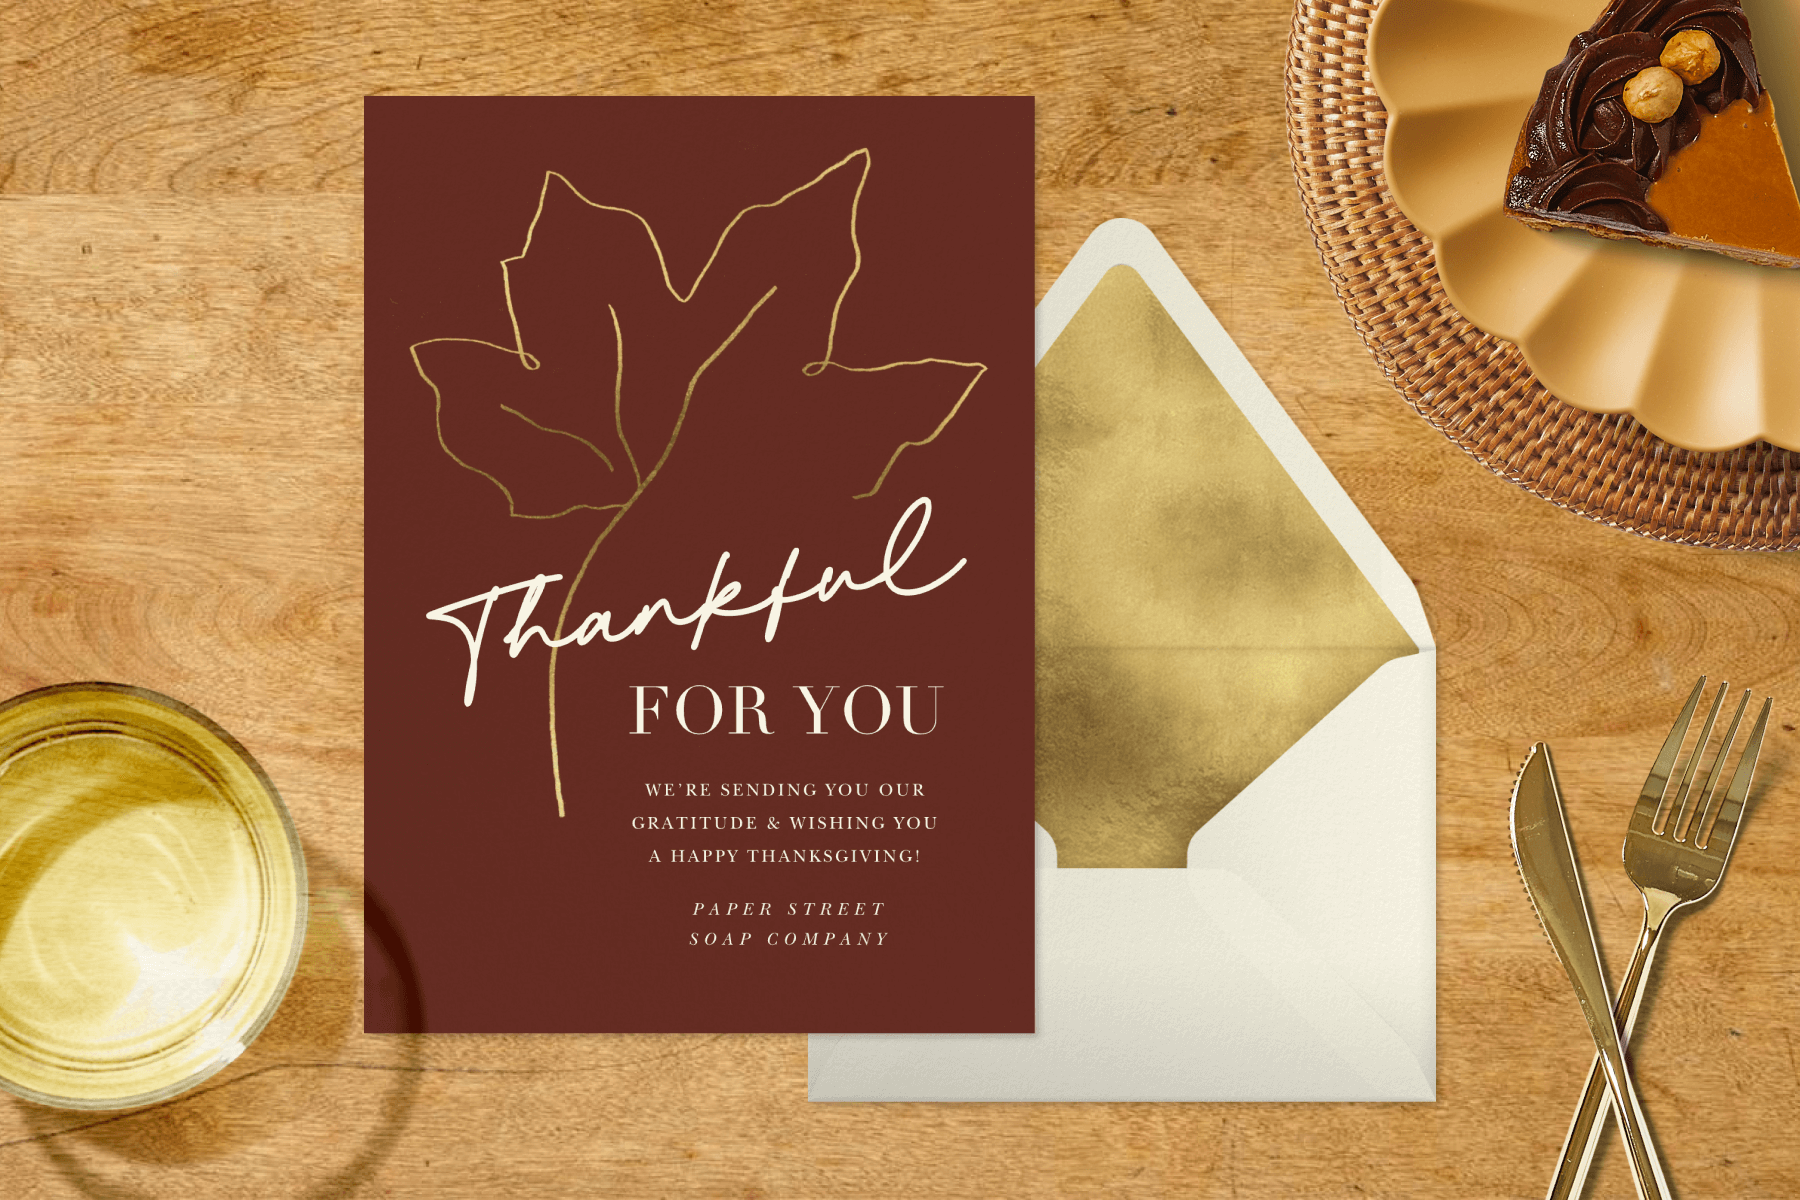 A brown thanksgiving greeting card with the words “Thankful for you.” It is surrounded by party items like a cup and a piece of pie on a plate.